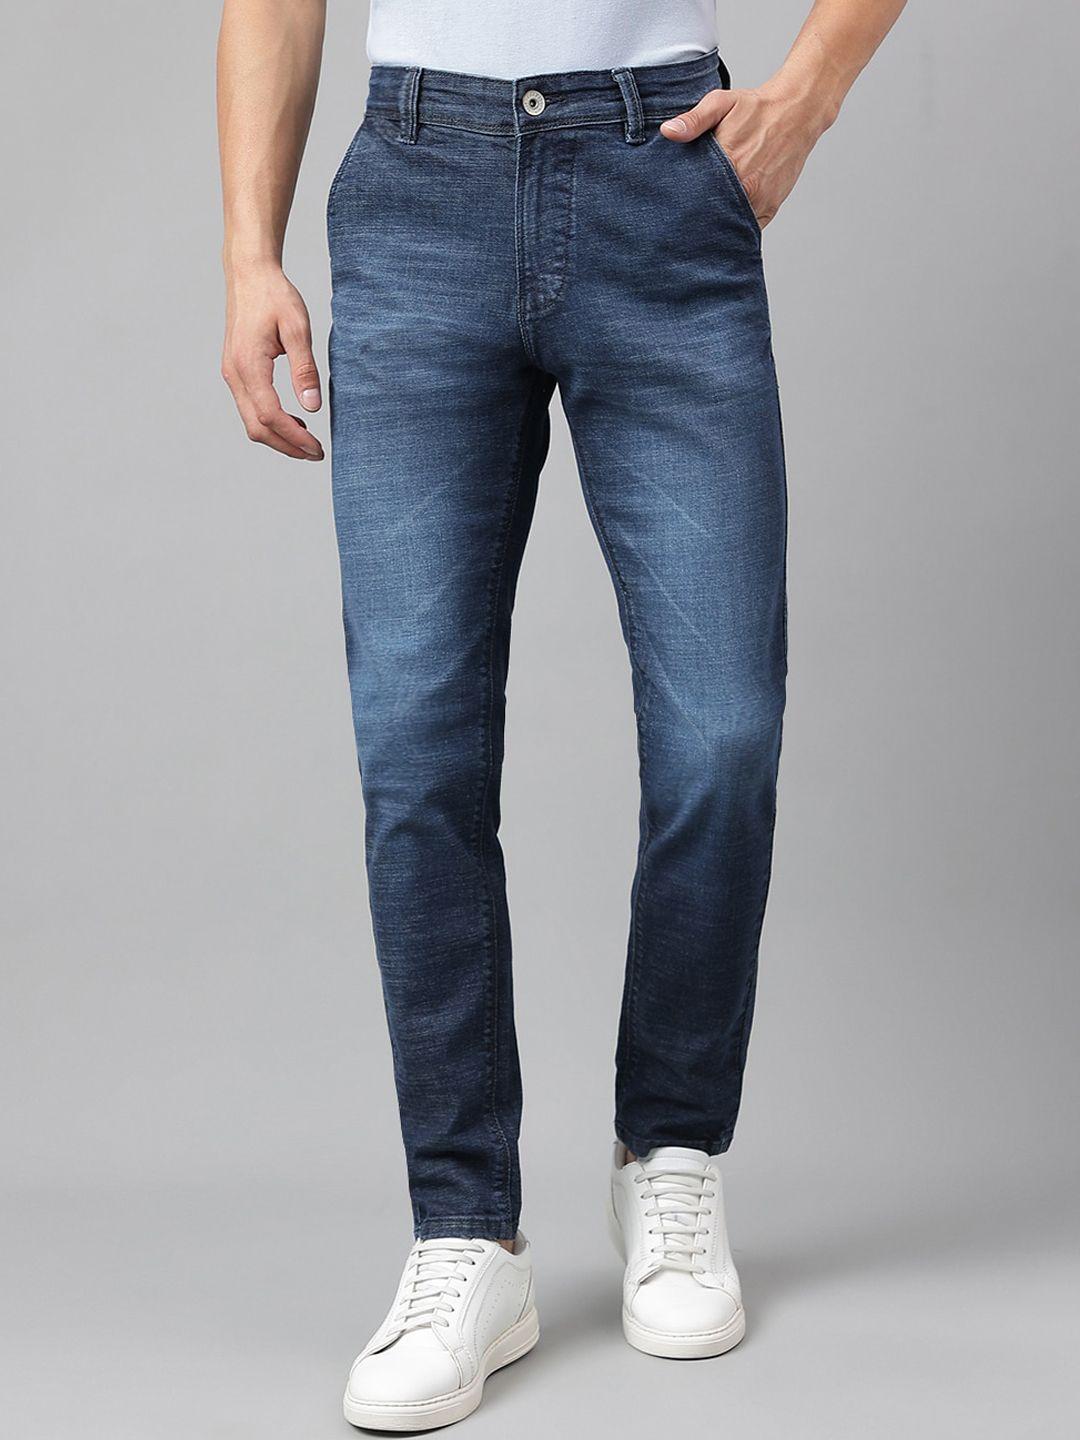 code-61-men-clean-look-skinny-fit-low-rise-light-fade-stretchable-jeans